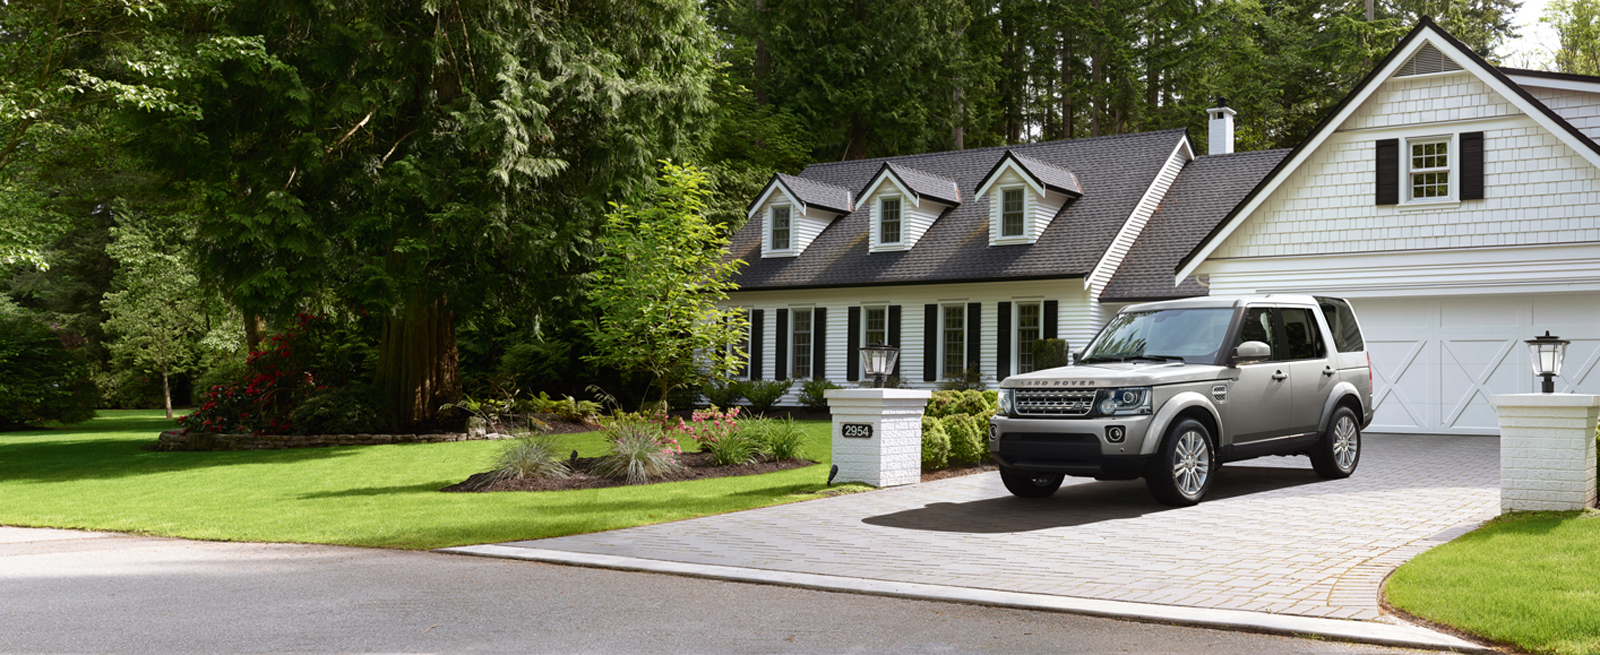 Silver Discovery sitting in the Driveway of a Modern White Farmhouse